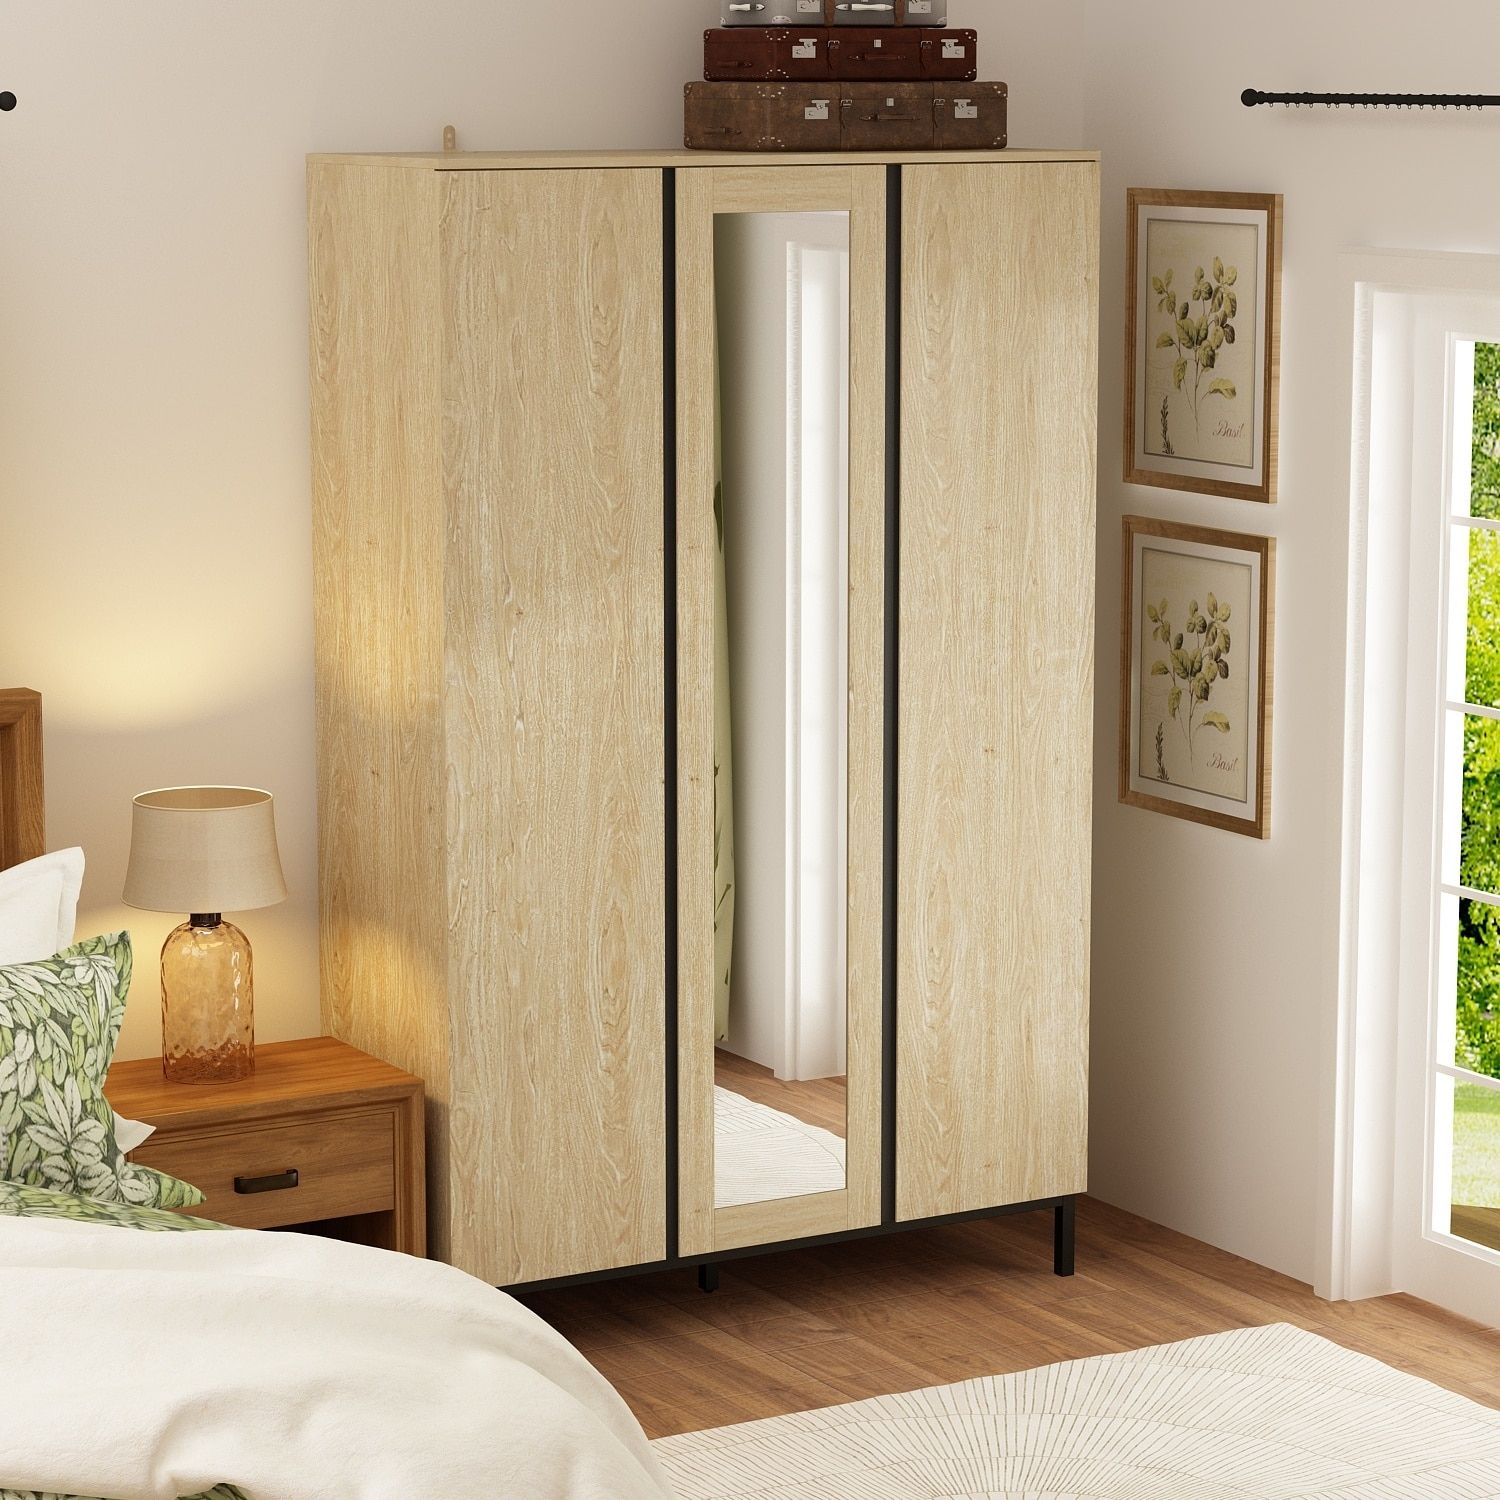 Armoire Wardrobes With Mirror Doors Closet Hanging Wood Finish 3 Doors –  Bed Bath & Beyond – 37250843 In 3 Doors Wardrobes With Mirror (Photo 14 of 15)